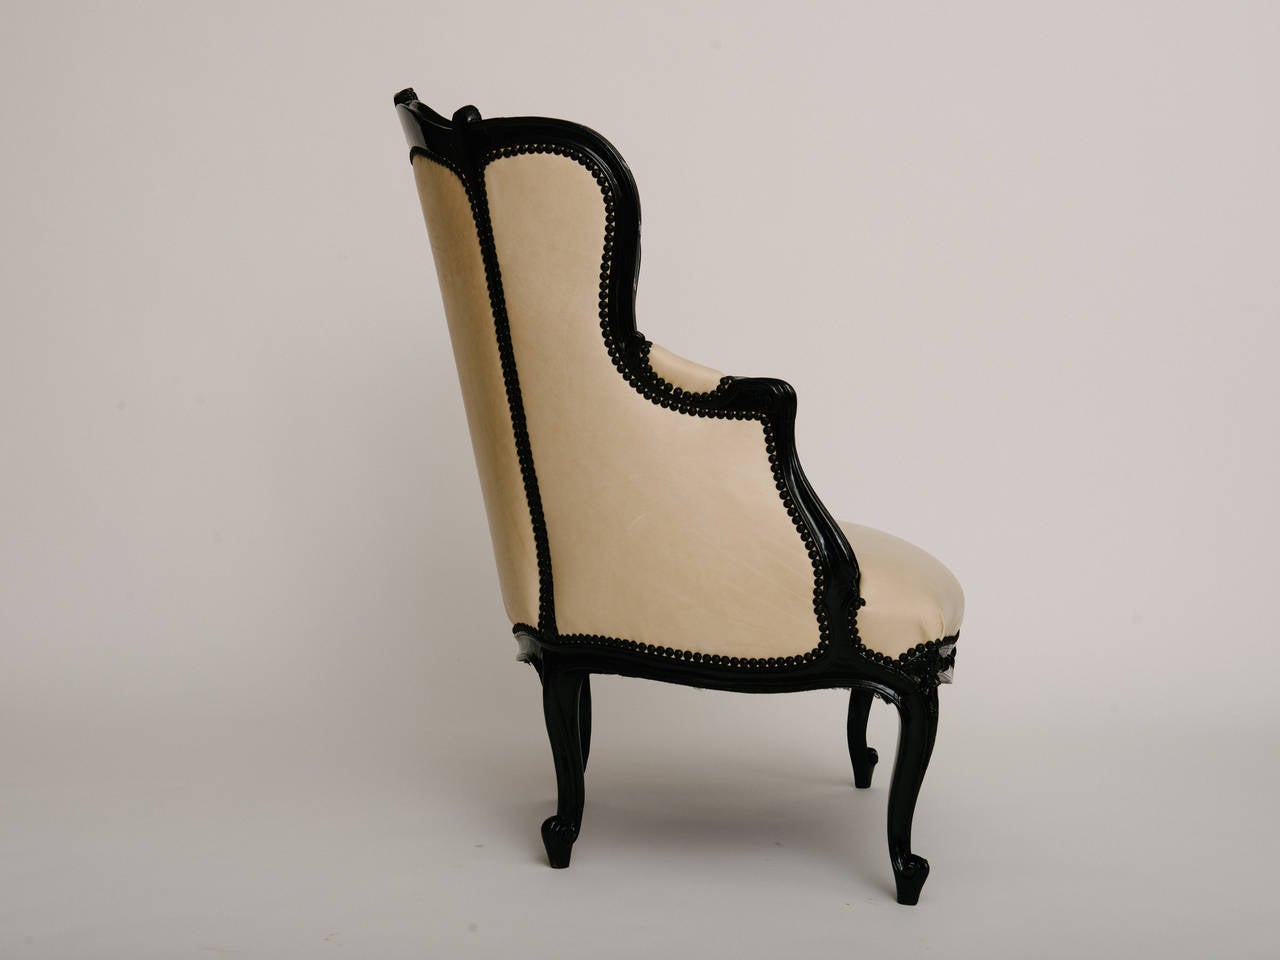 19th century black lacquered bergère. Newly upholstered in a nude Italian leather and matte black nailhead trim.